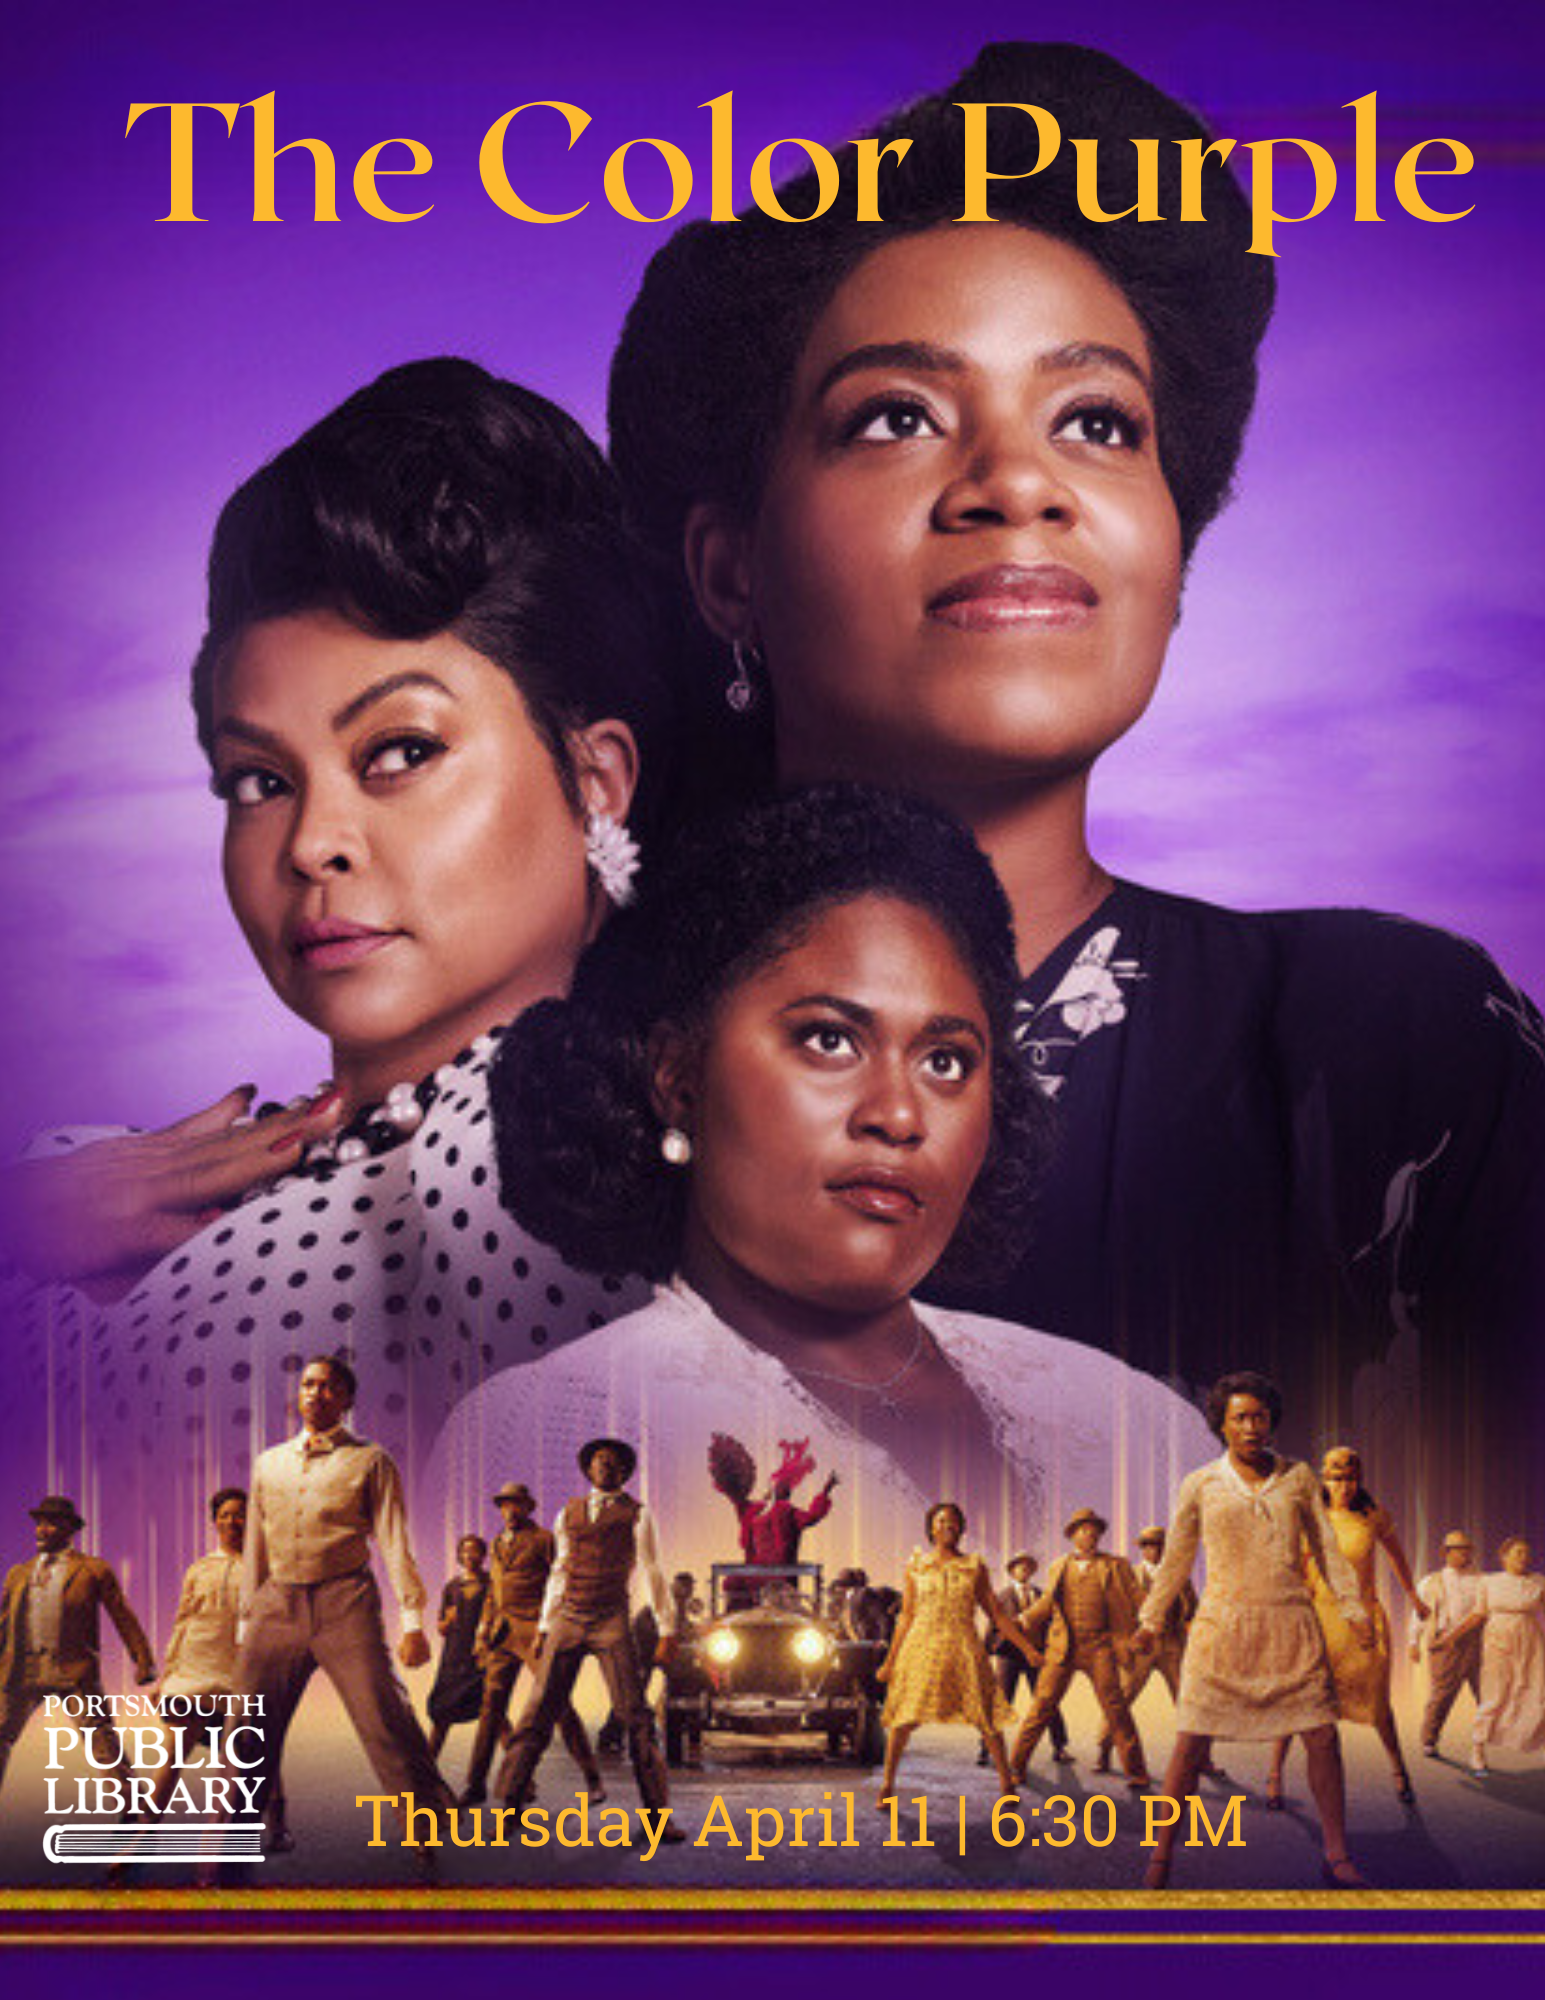 Three black women above black men and women dancing in the street The Color Purple April 21 at 6:30 PM